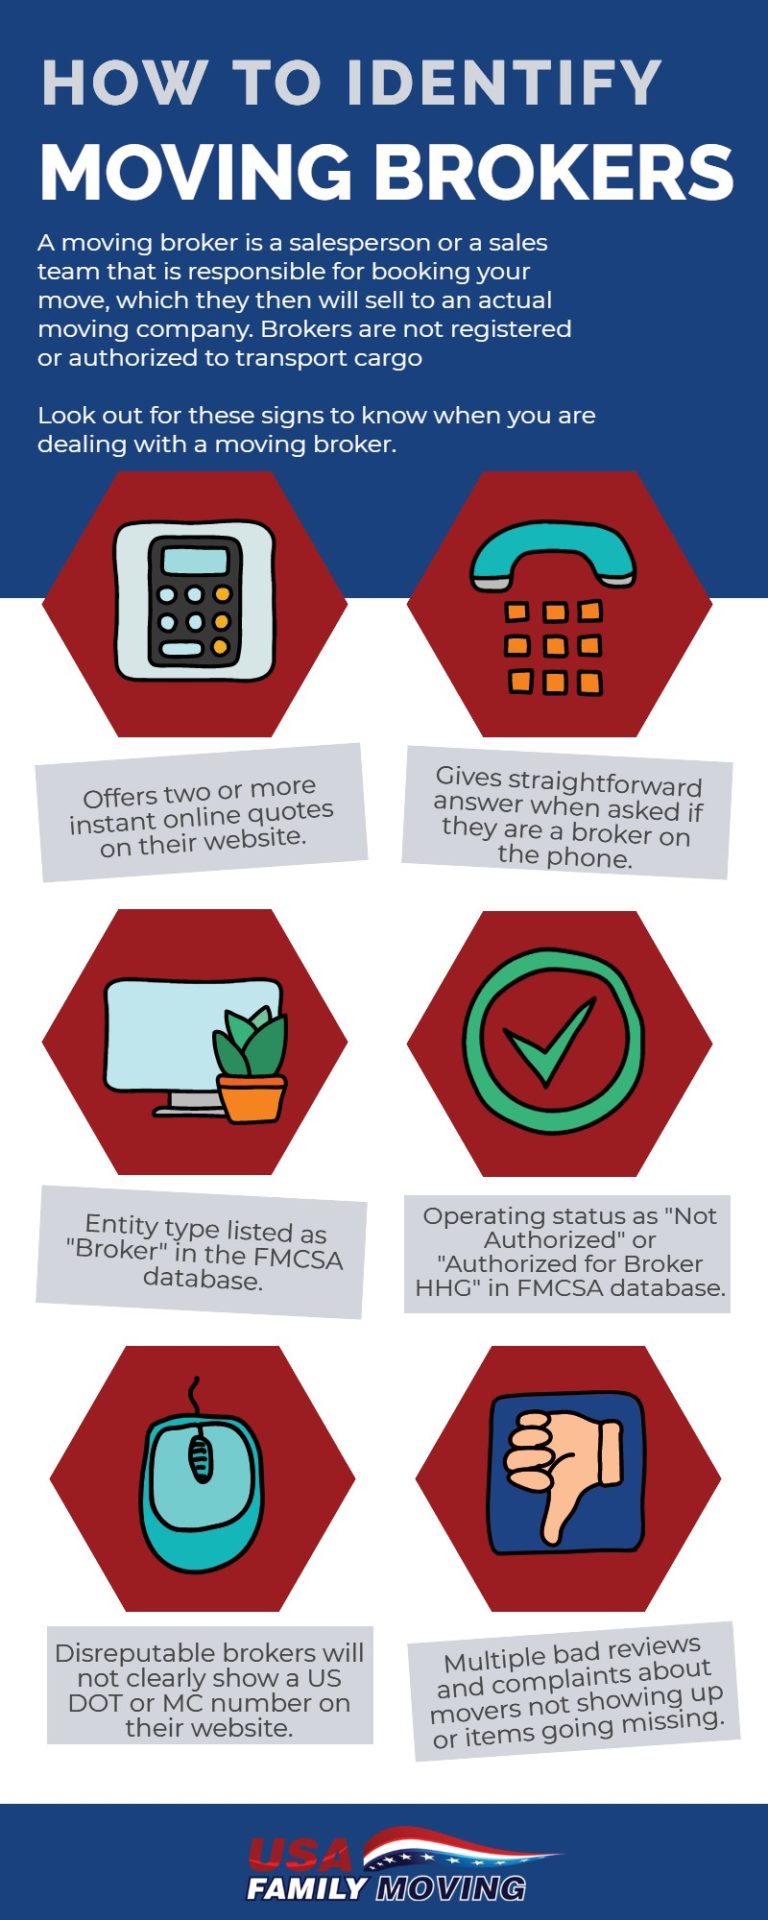 Infographic showing tips on how to identify moving brokers